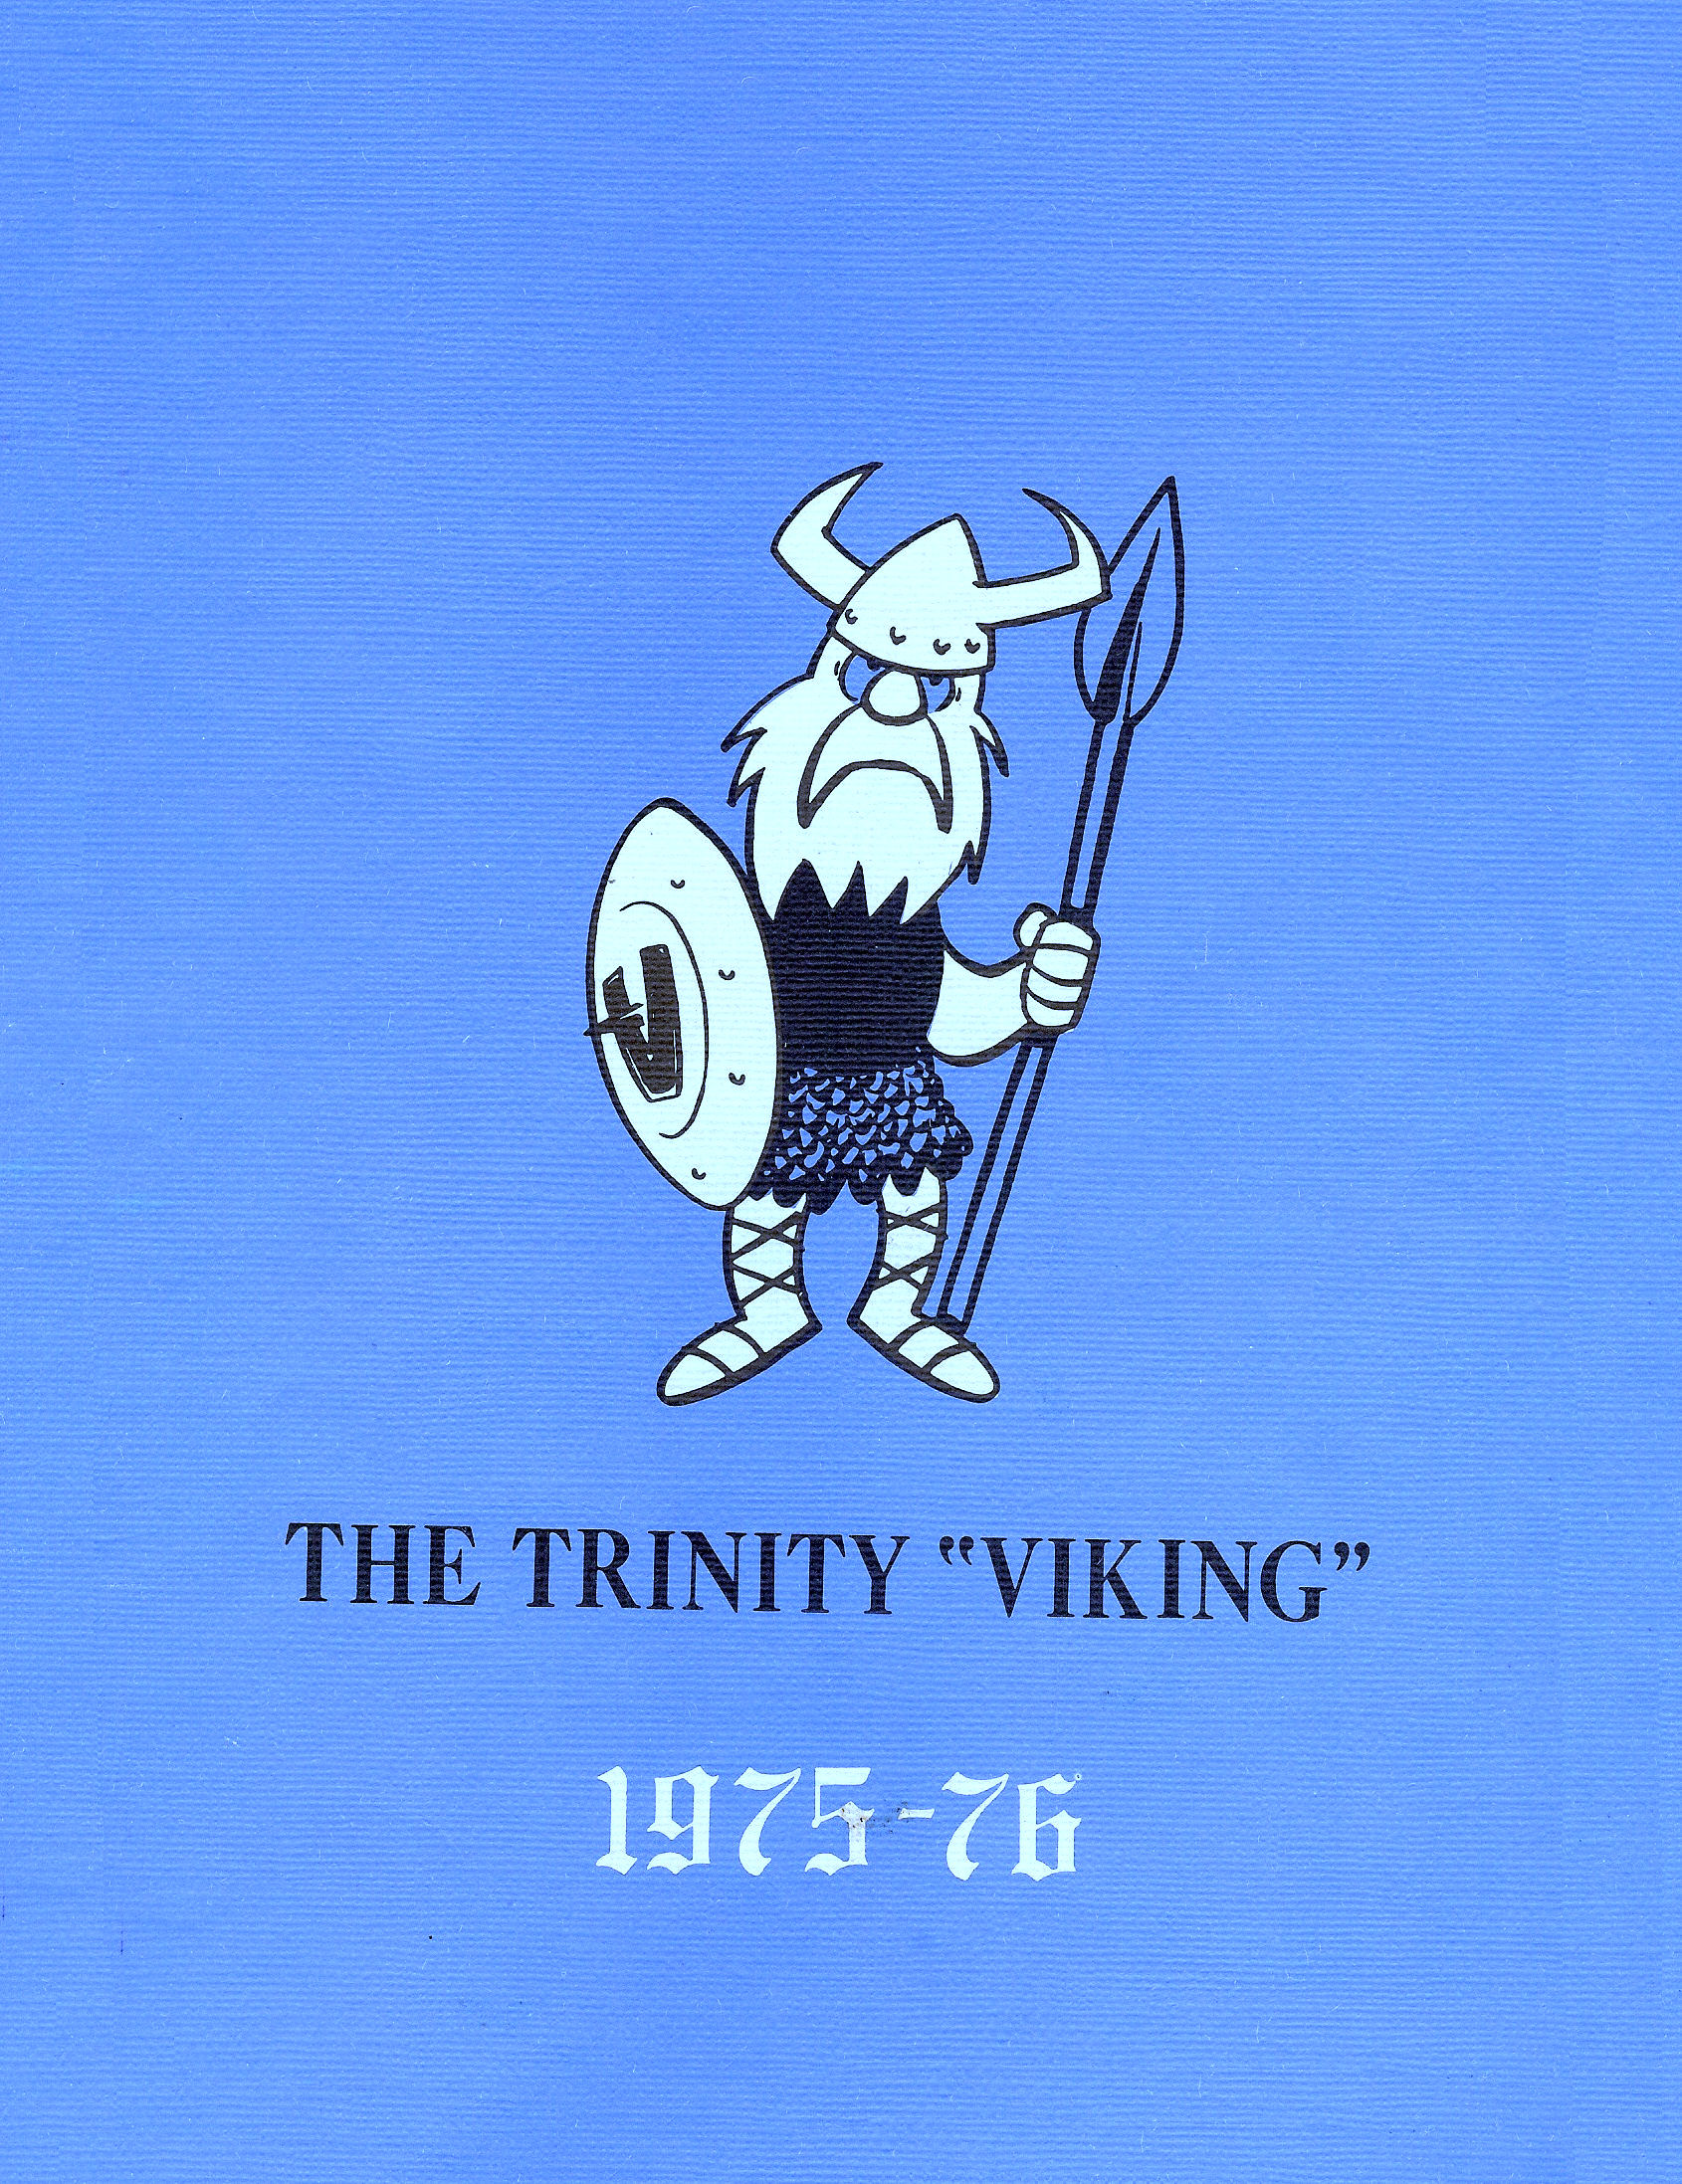 75-76 Yearbook Cover